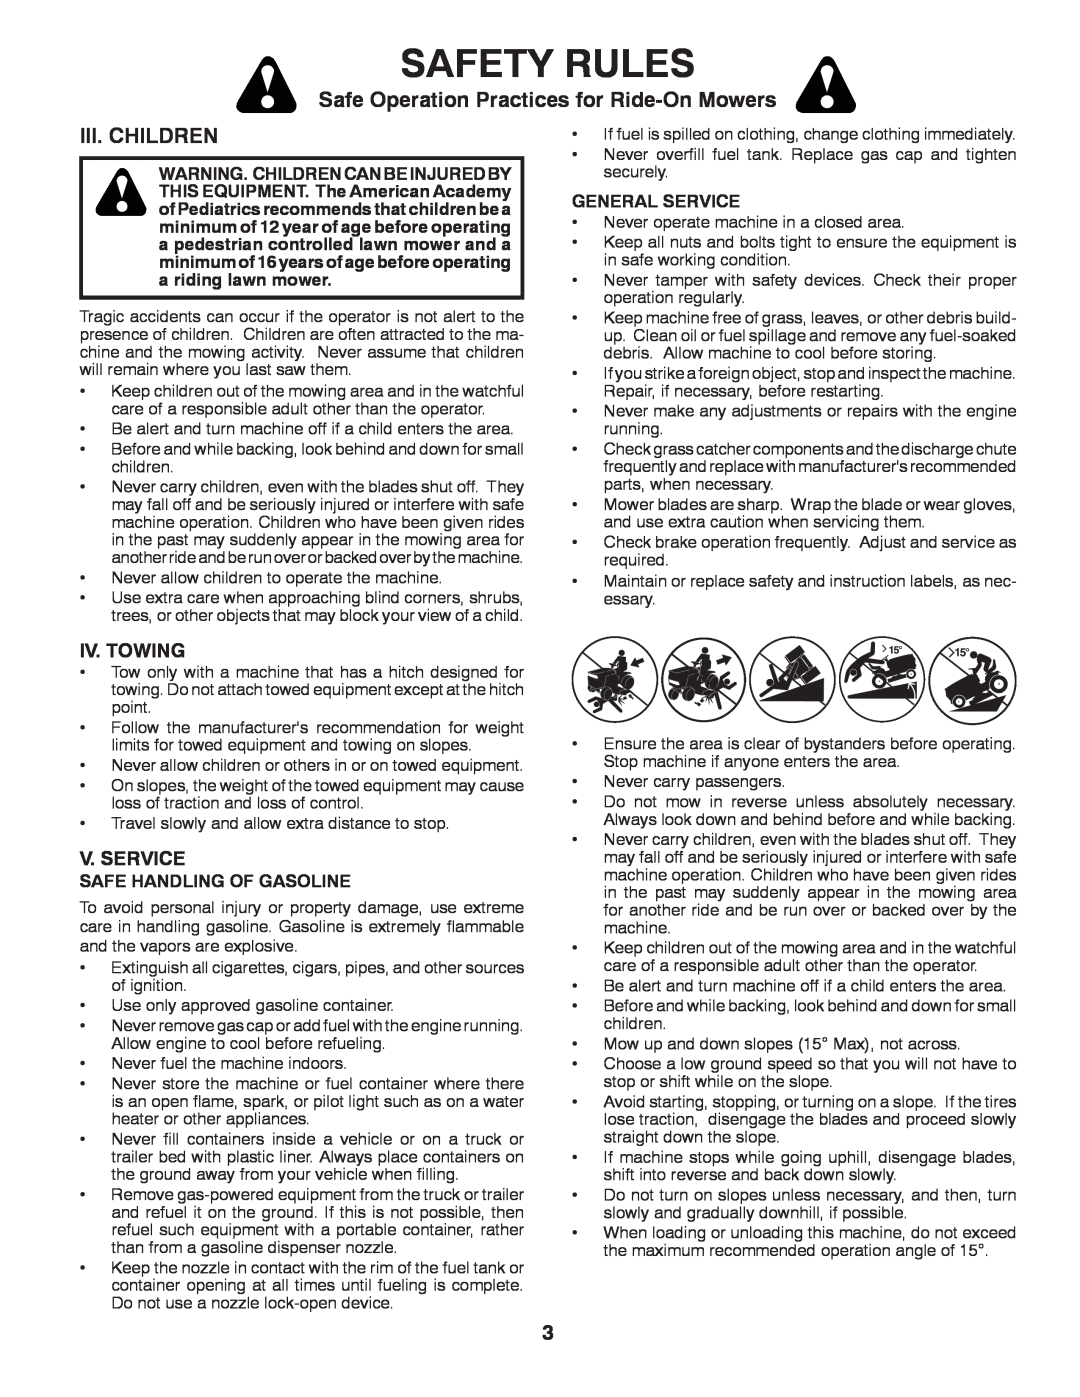 Husqvarna YTH18K46 Iii. Children, Safety Rules, Safe Operation Practices for Ride-On Mowers, Iv. Towing, V. Service 